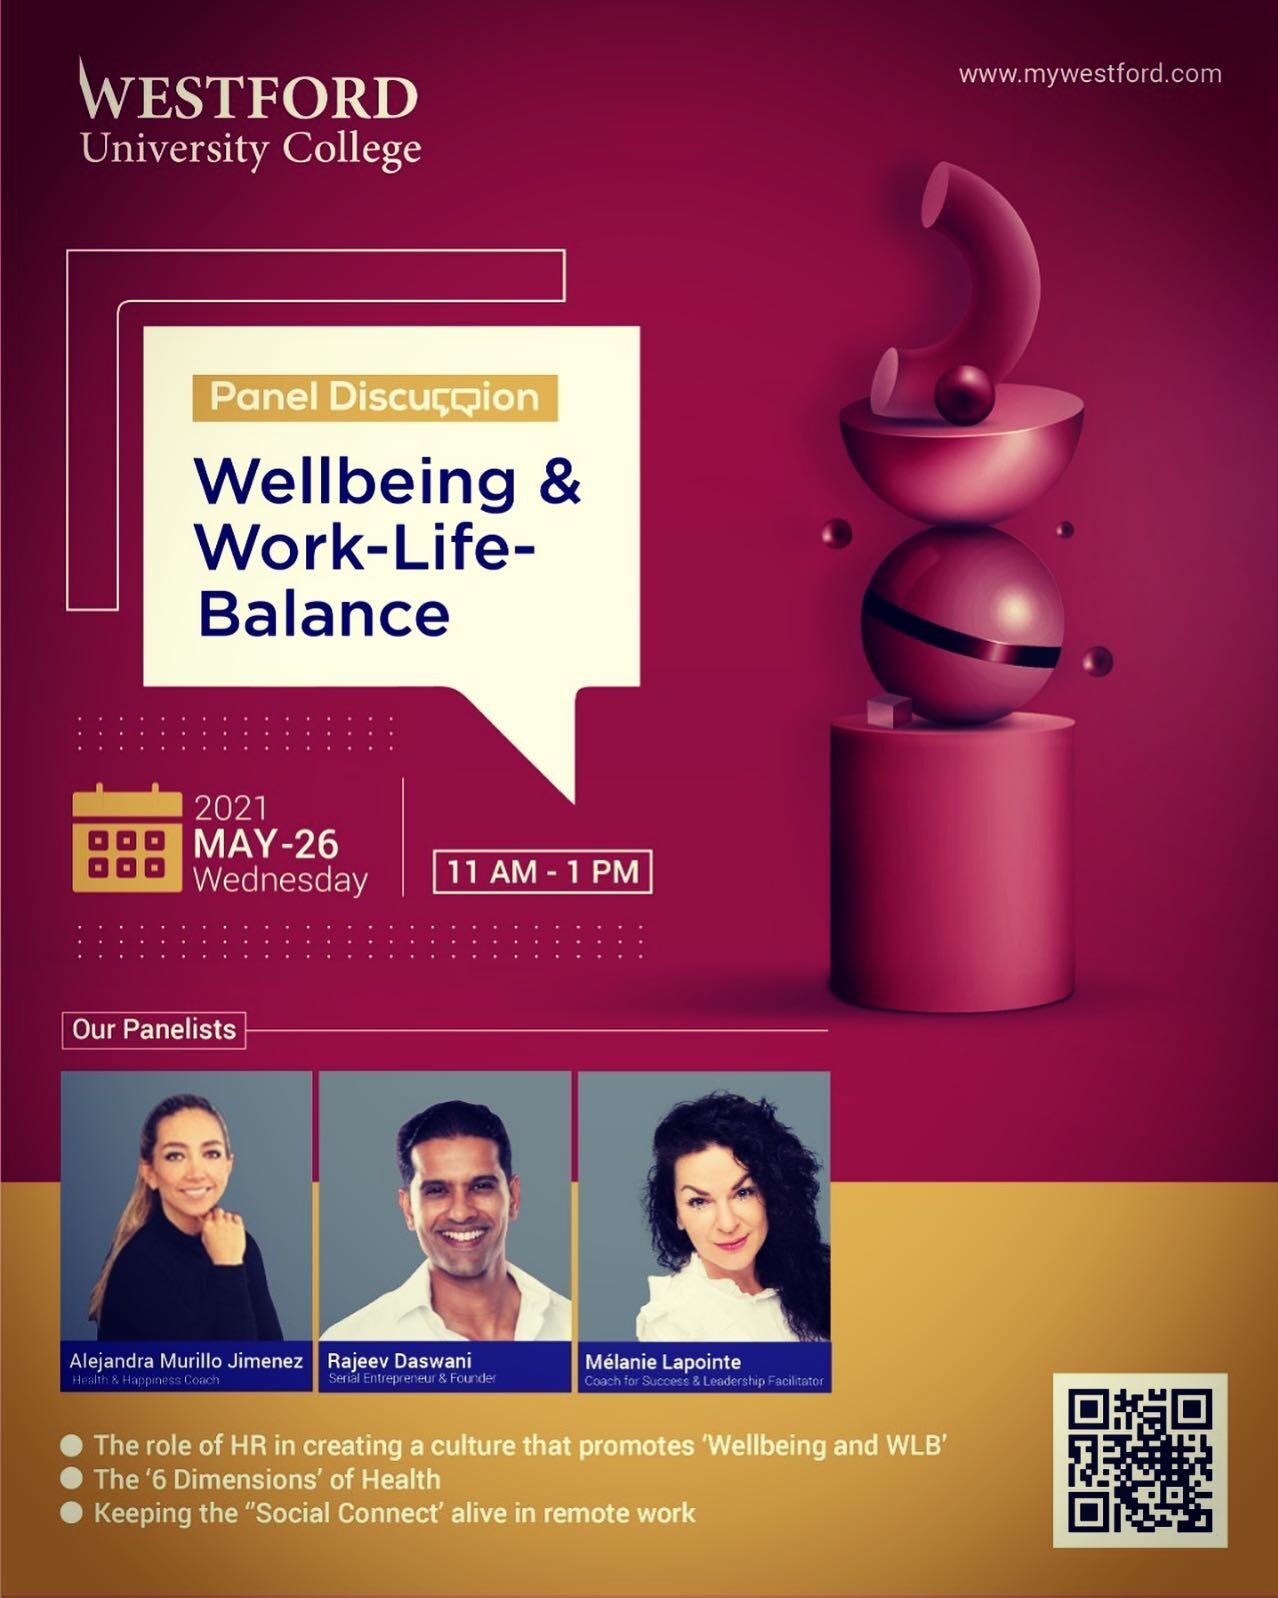 A dream come true! My first panel as a guest speaker! ✨

Thank you @westfordcollege for hosting this great panel on #wellbeing I am looking forward to sharing #coaching tips &amp; tools on how corporate can better support  their employees as well as 